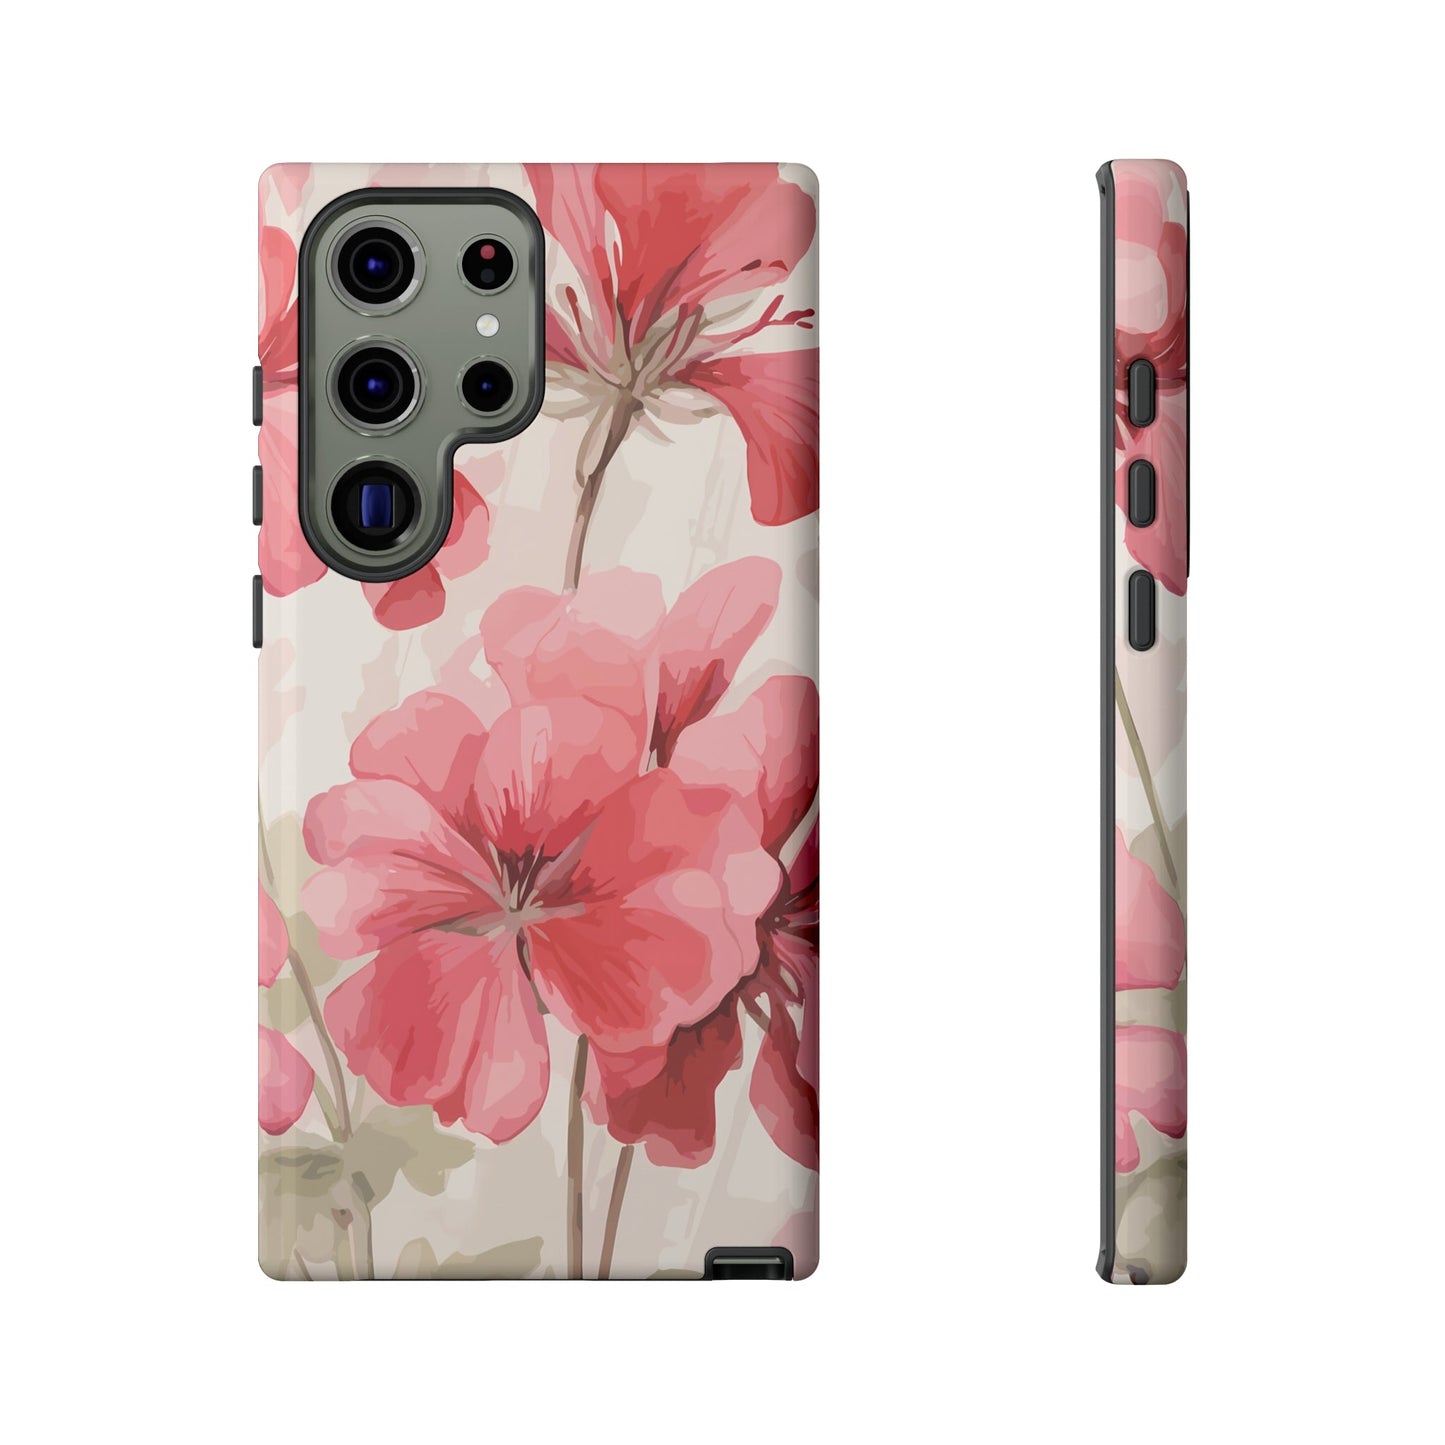 Floral Phone case fits iPhone Samsung Galaxy Google Pixel - Cheerful Lane